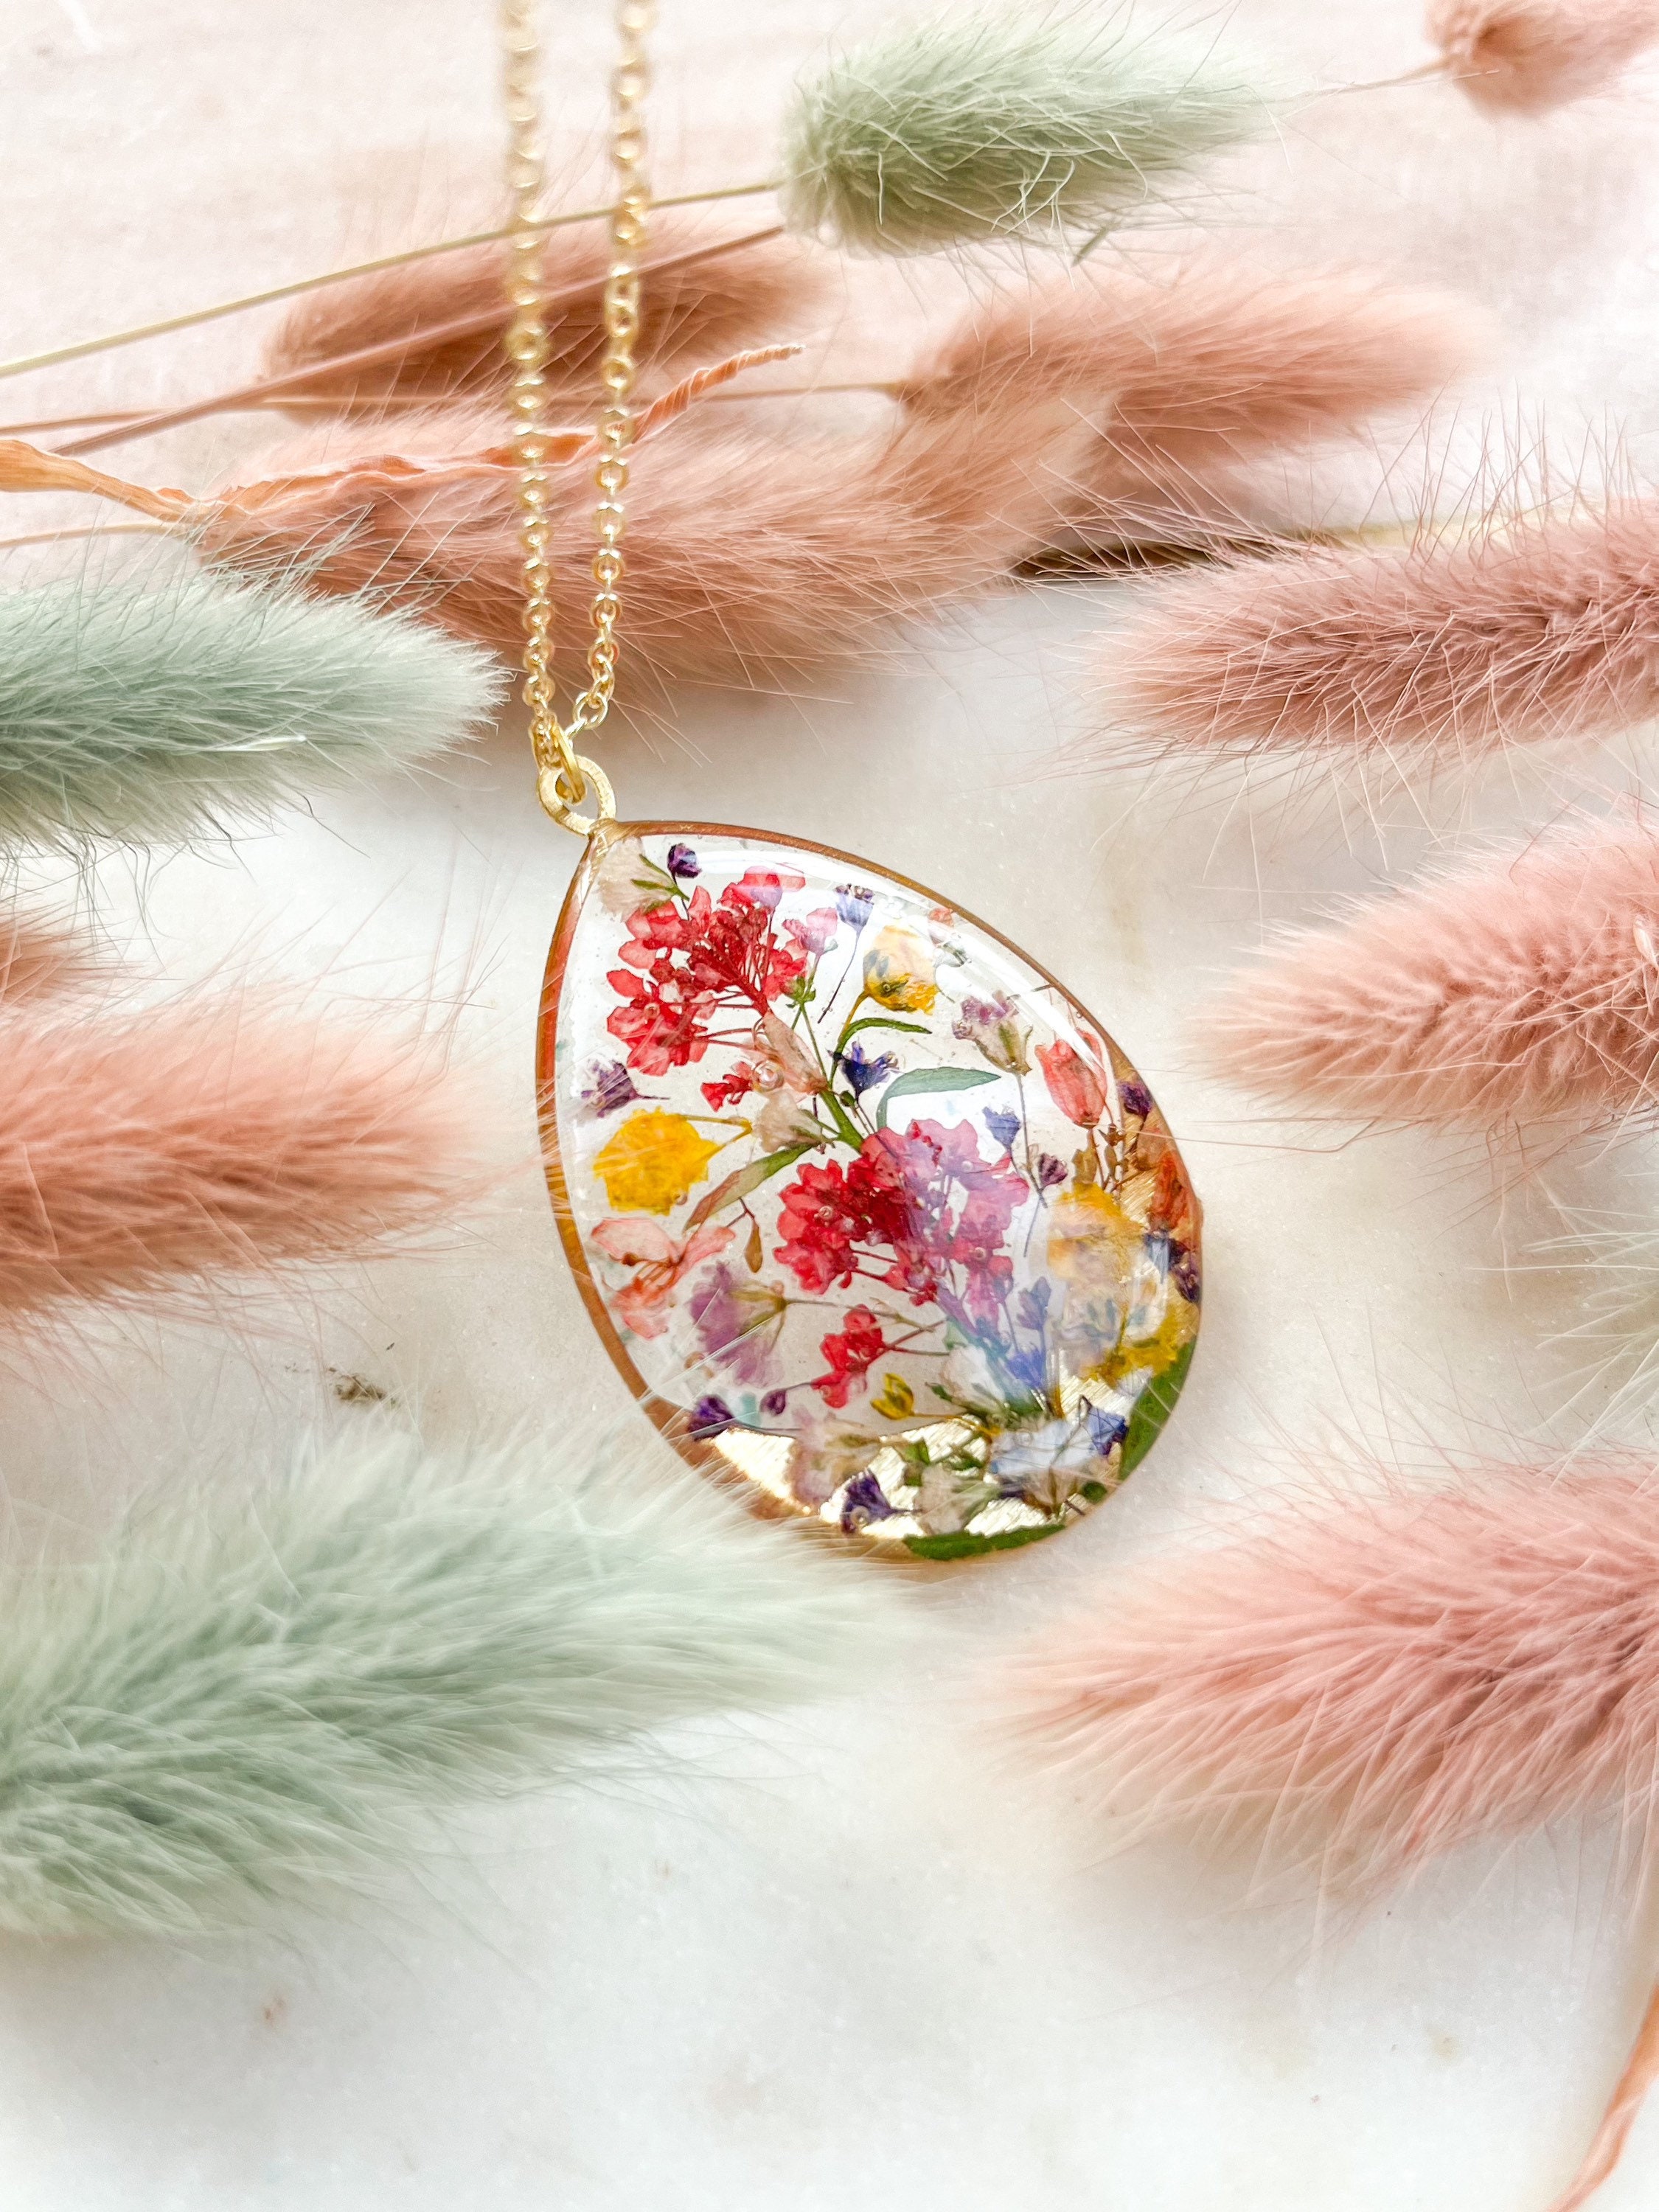 Pressed Wild Flower Necklace On 22K Gold Plated Chain, Botanical Jewellery, Resin, Boho